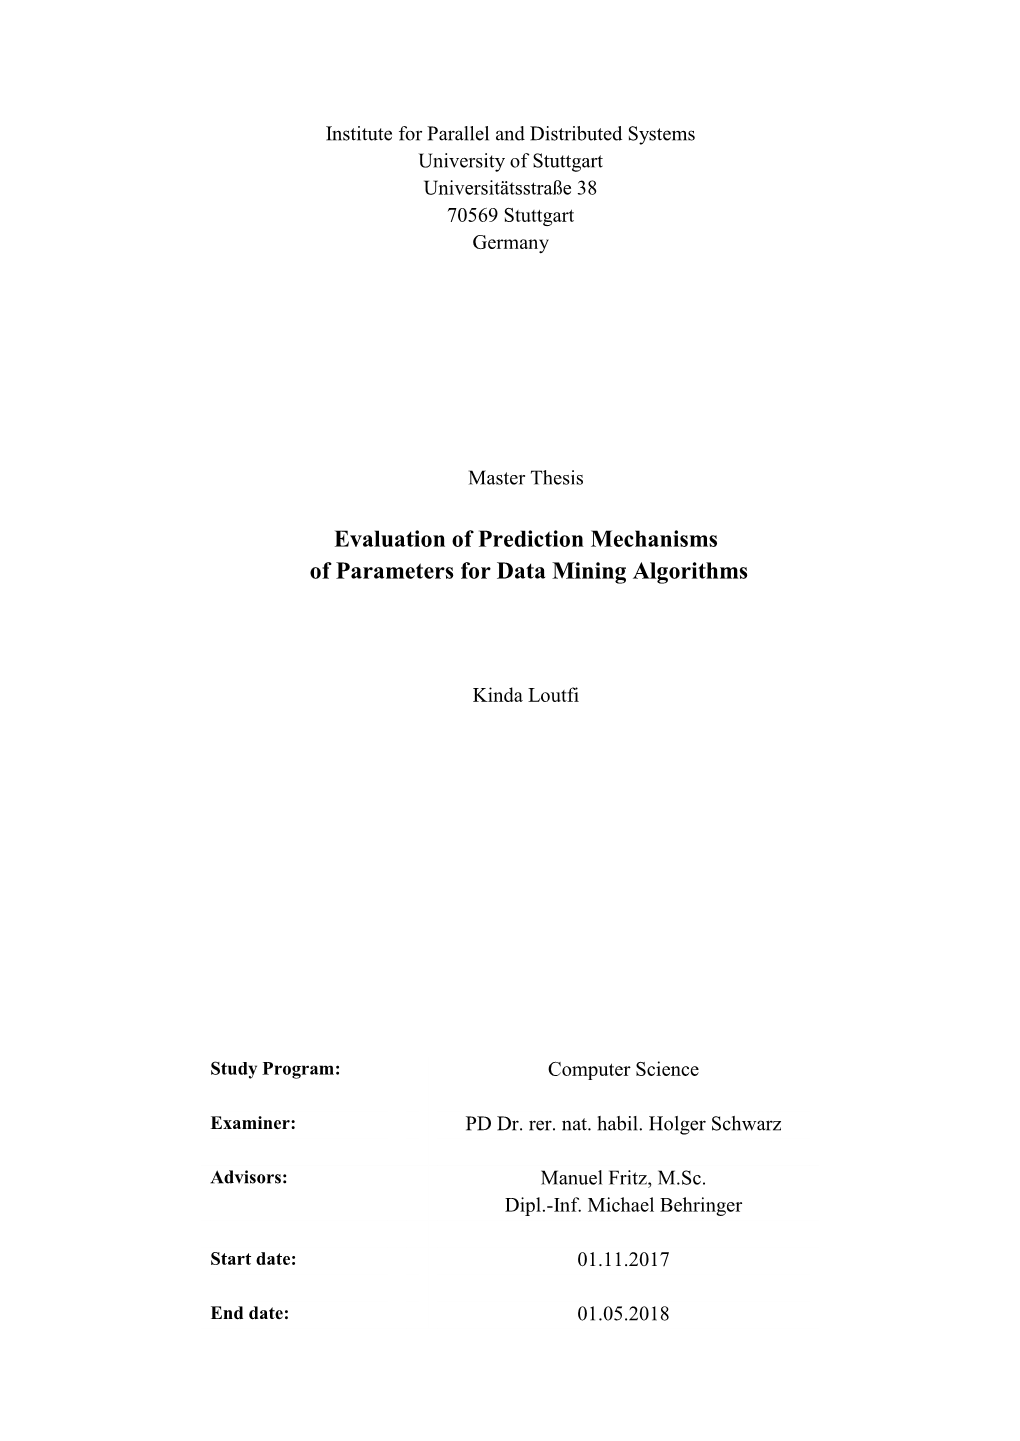 Evaluation of Prediction Mechanisms of Parameters for Data Mining Algorithms